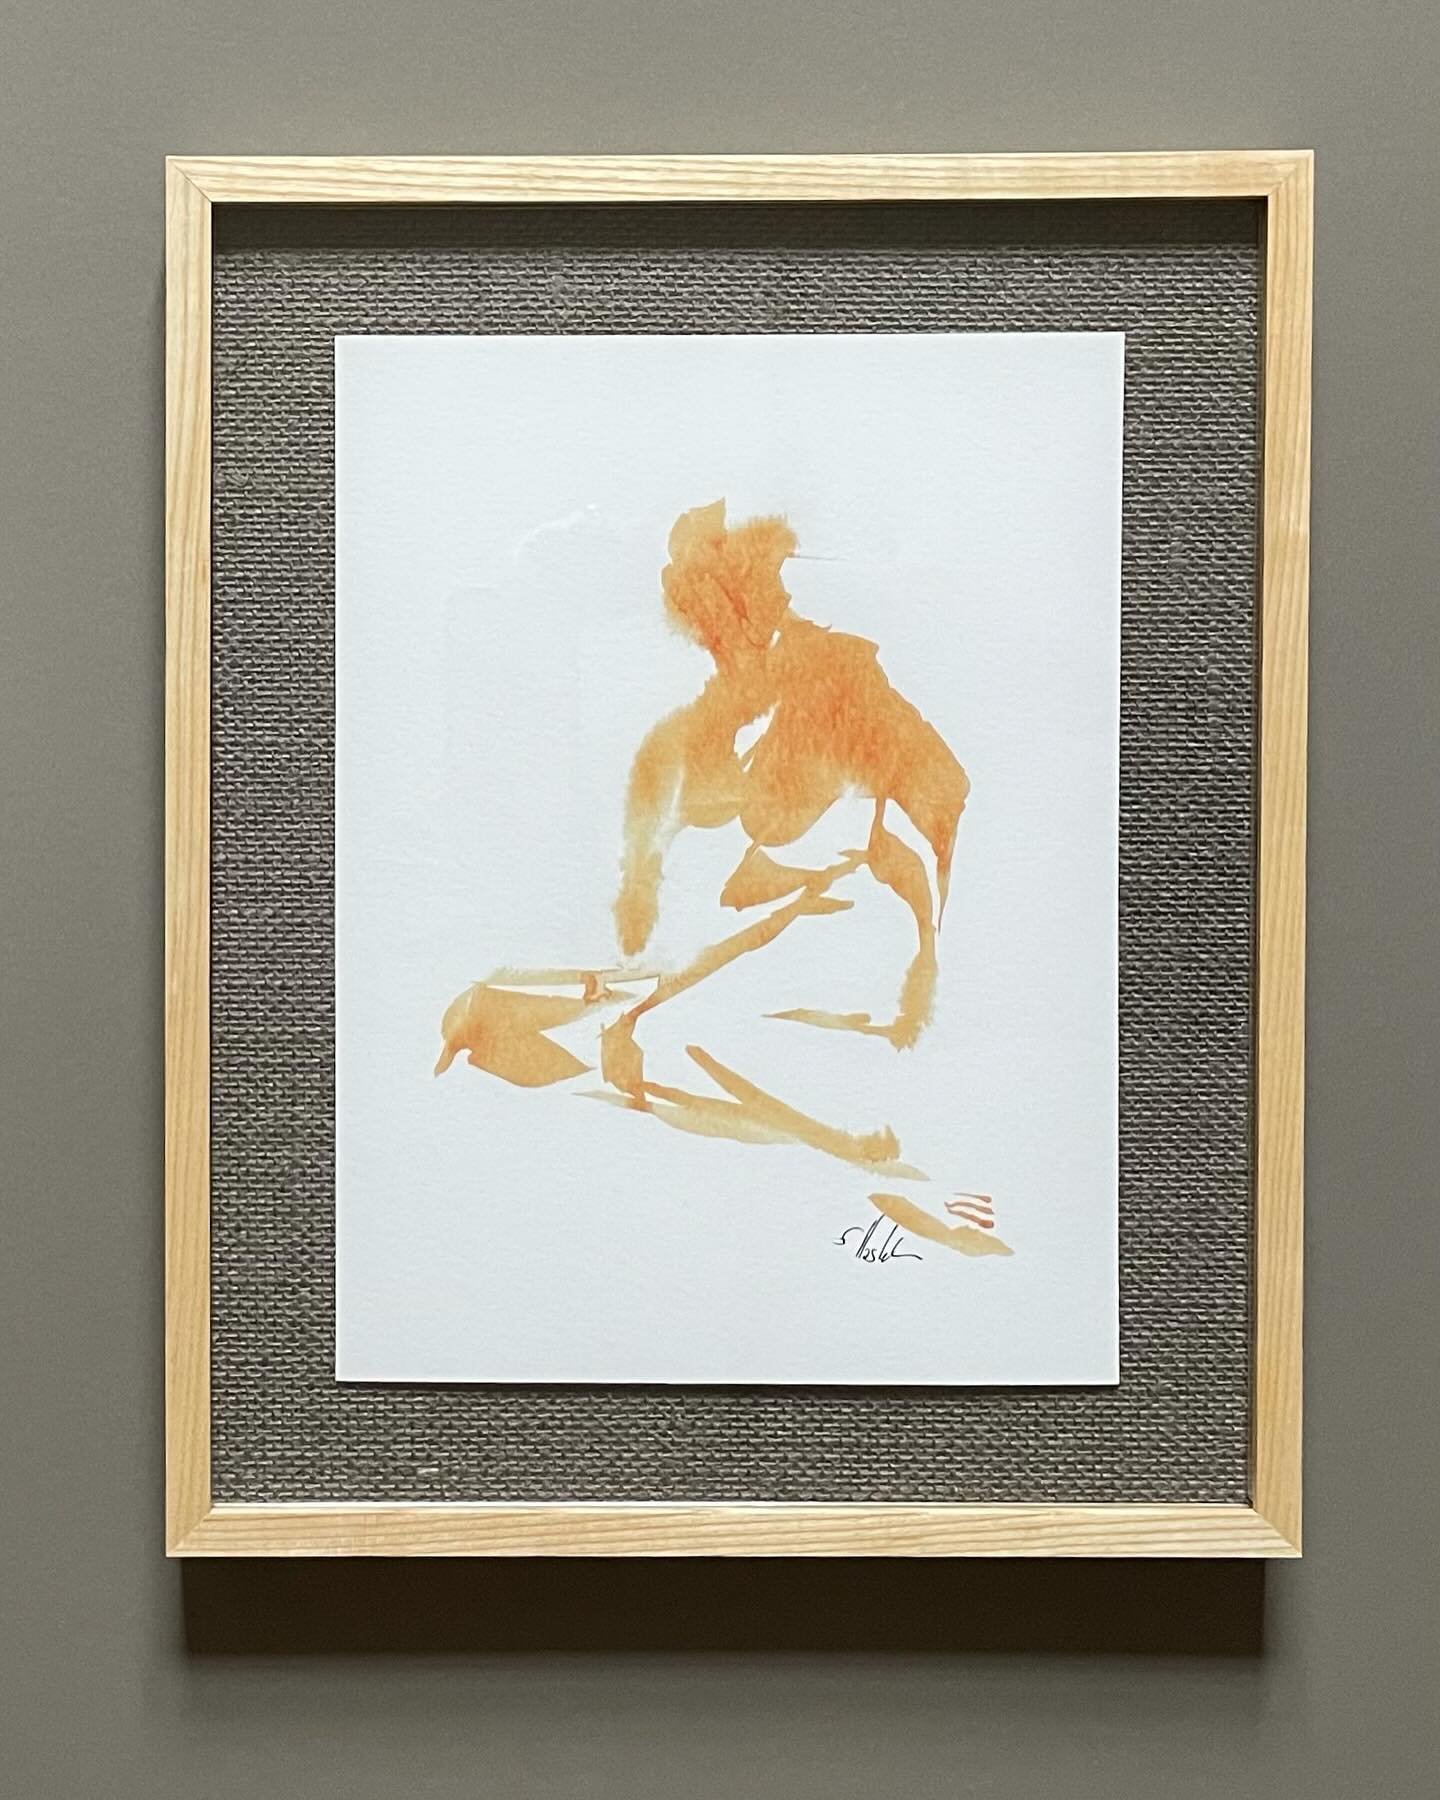 This original figurative painting looks perfect complimented with a Vermont Hardwoods Frame and fabric mat. 

#original art #artonpaper #floatmount #truvue #museumglass #custompictureframing #frameshop #vermonthardwoods #bedfordny #northernwestcheste